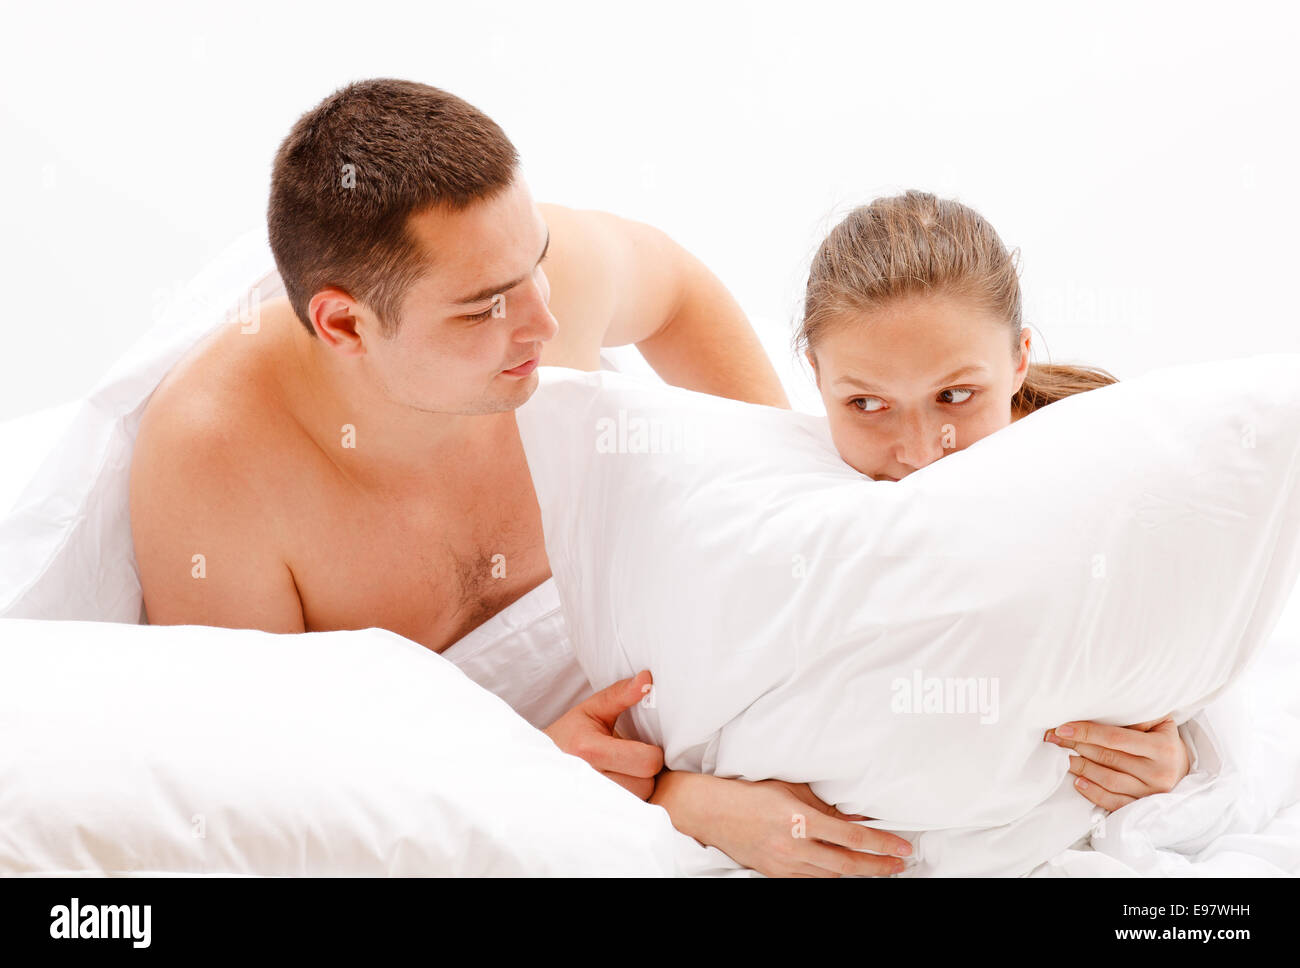 Young naked couple in bed, man comforting woman Stock Photo